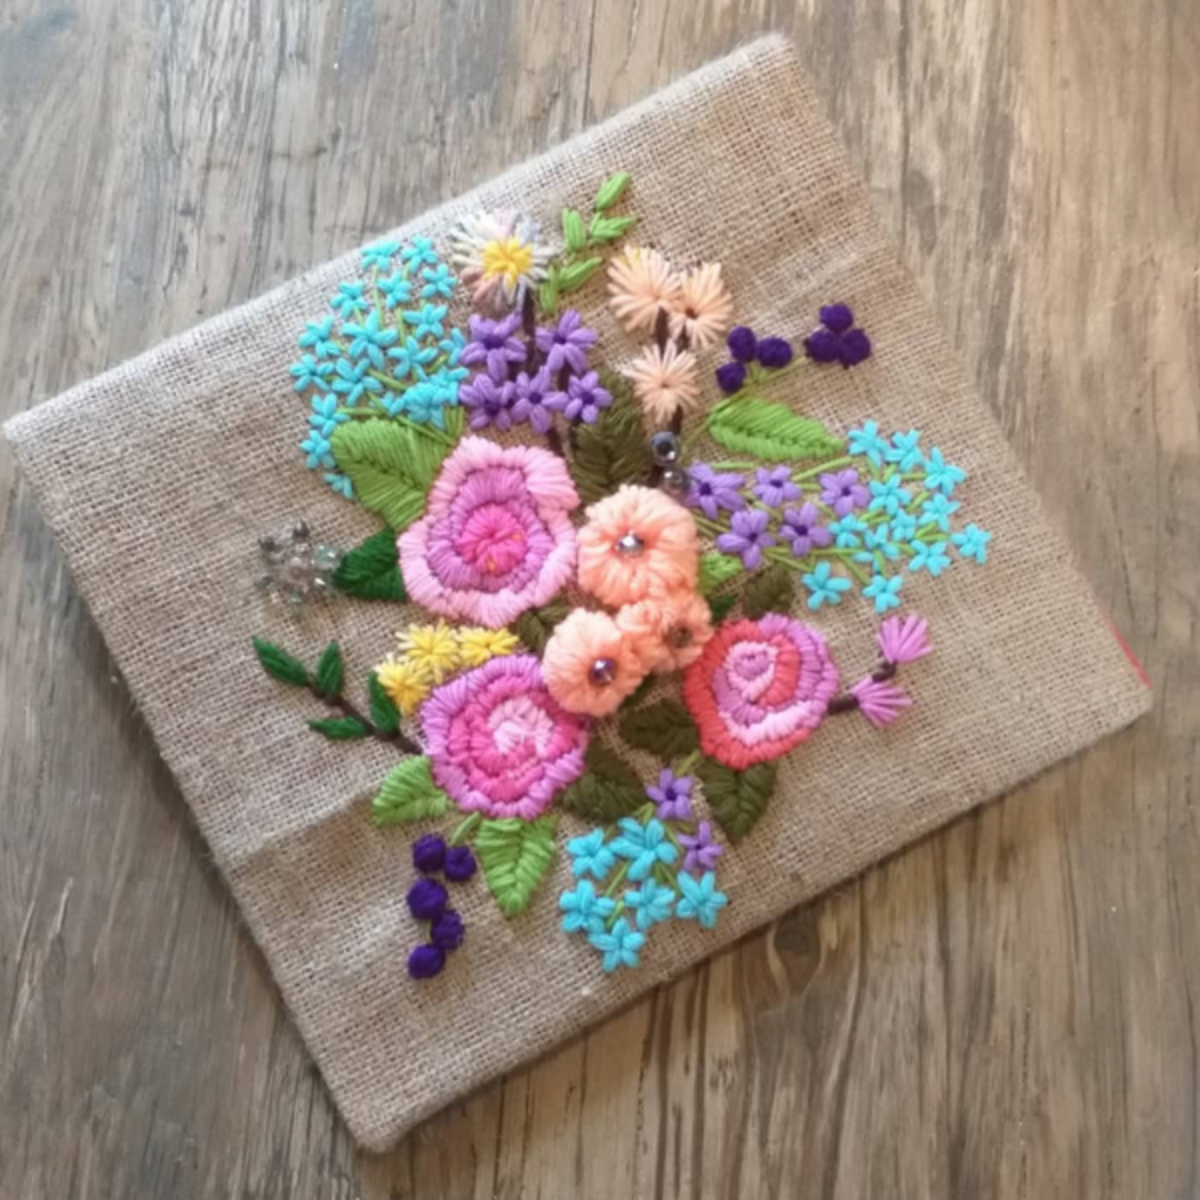 These are the flowers I embroidered on my calendar cover.